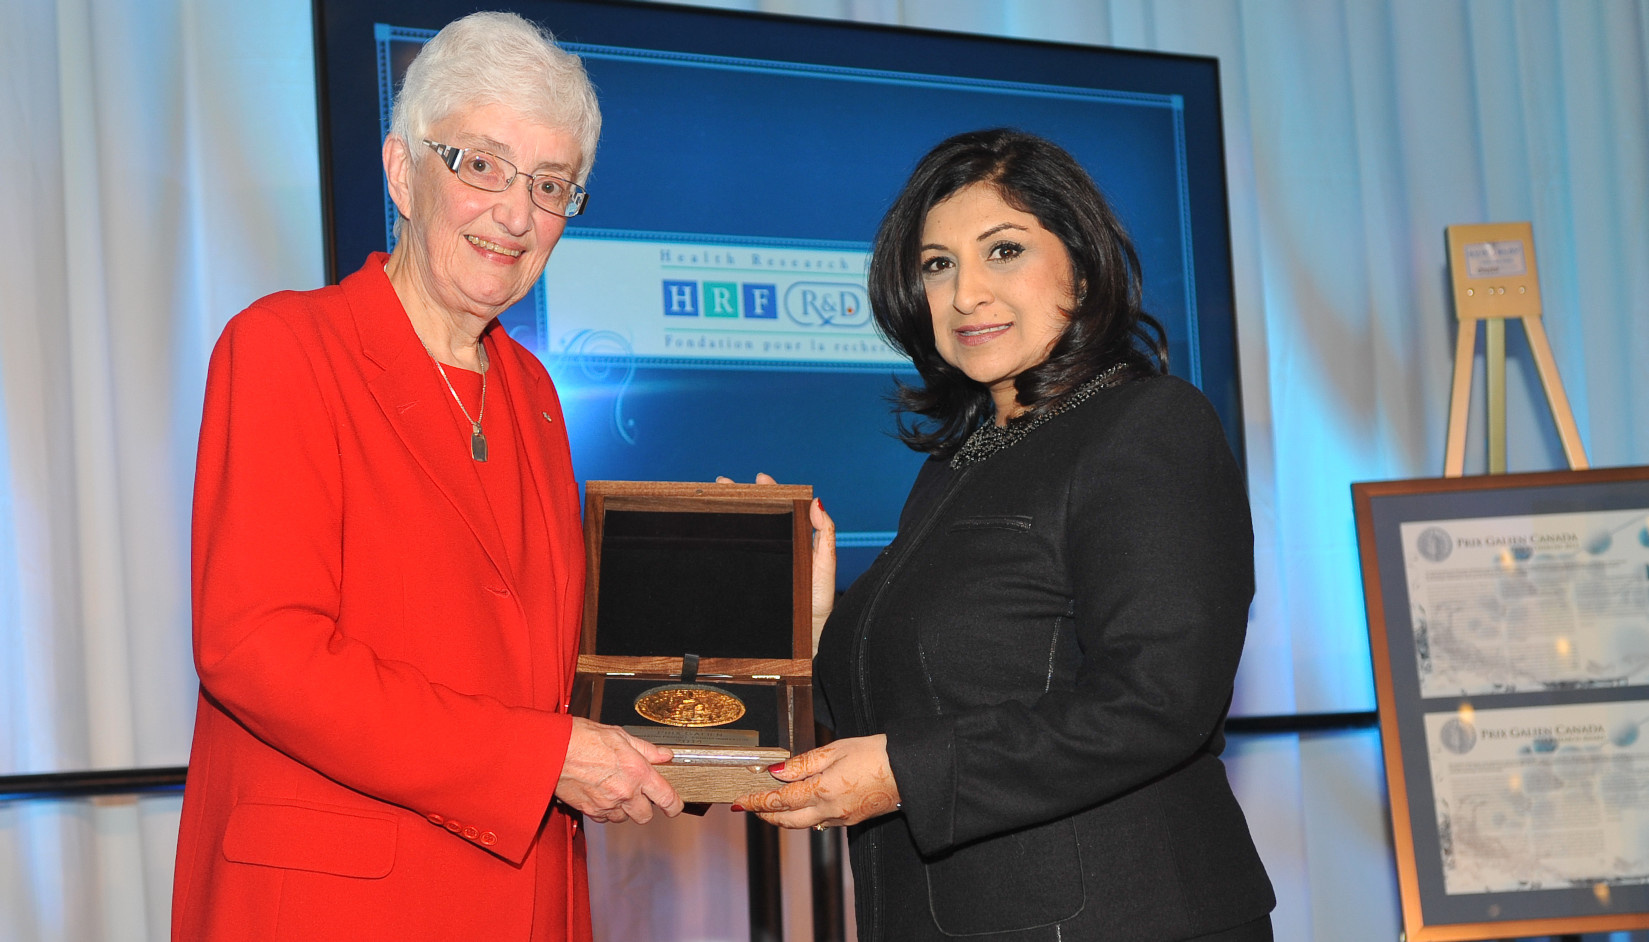 2014 - Dr. Jean Gray, President of the Jury and Dr. Nozhat
Choudry, Director, Medical Affairs of InterMune Canada (Roche)